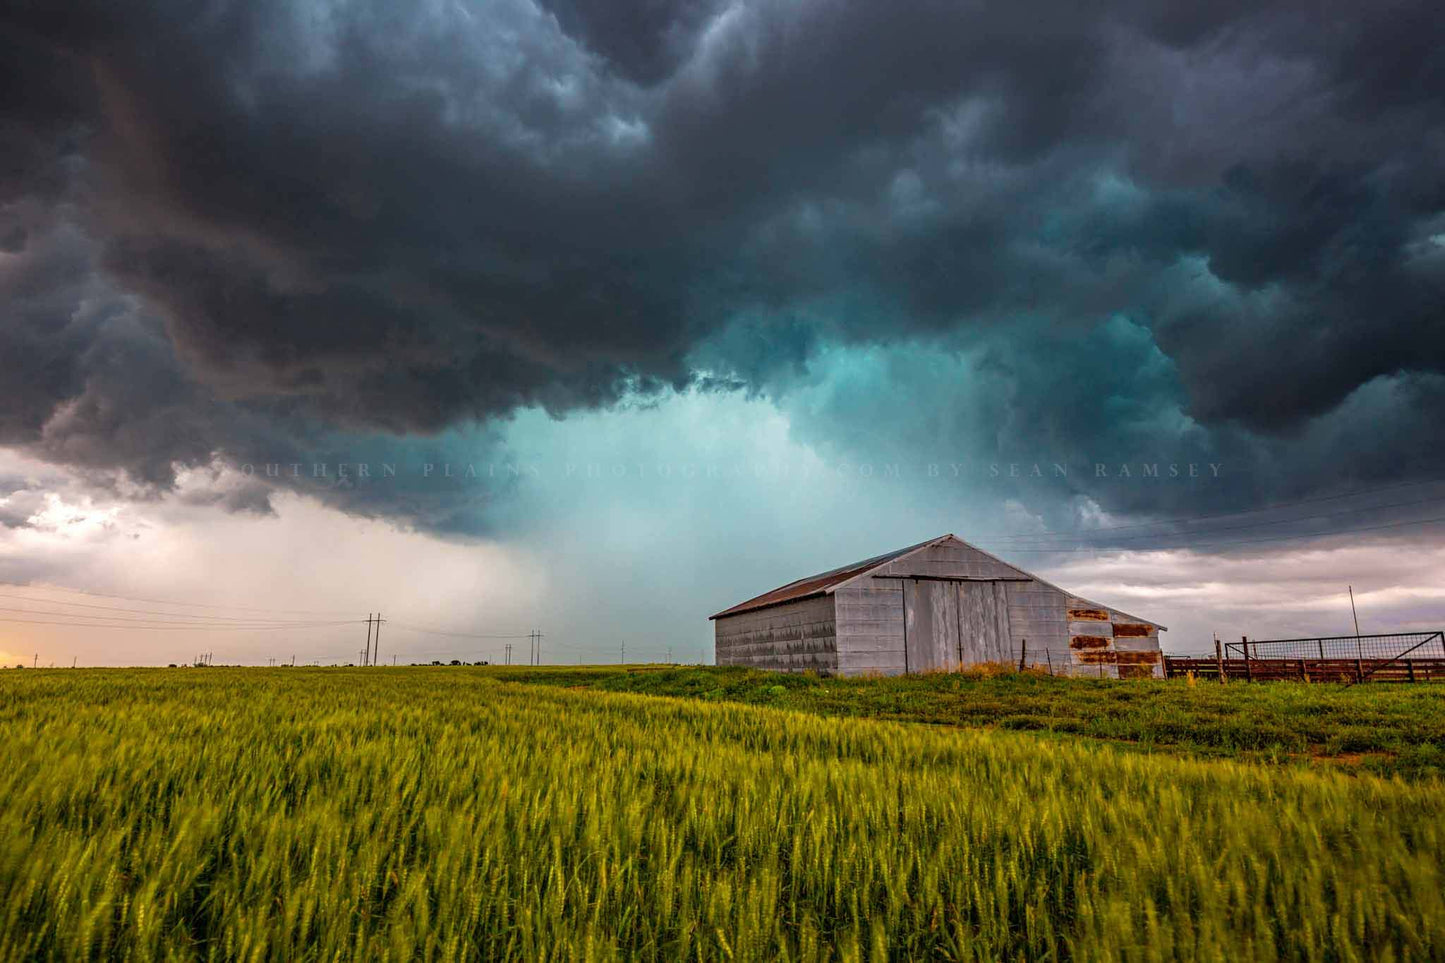 Storm photography print of an intense thunderstorm passing behind an old tin covered barn on a stormy spring day in Oklahoma by Sean Ramsey of Southern Plains Photography.